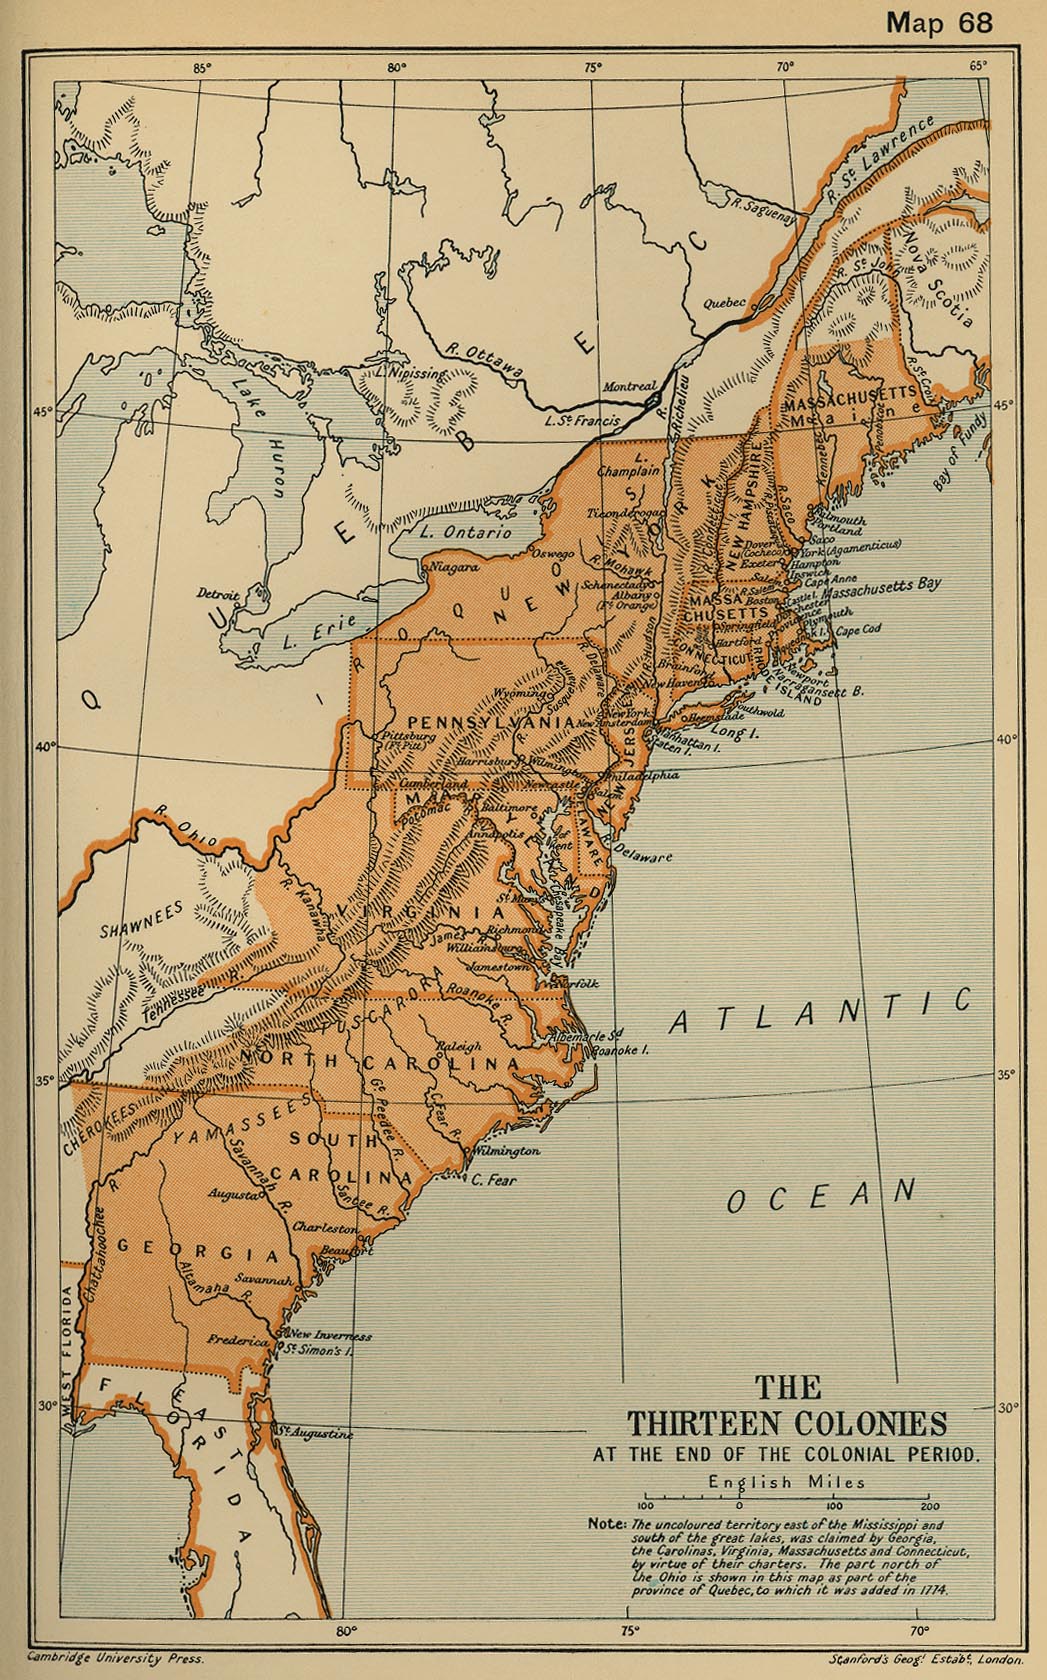 Map of the American Colonies 1775